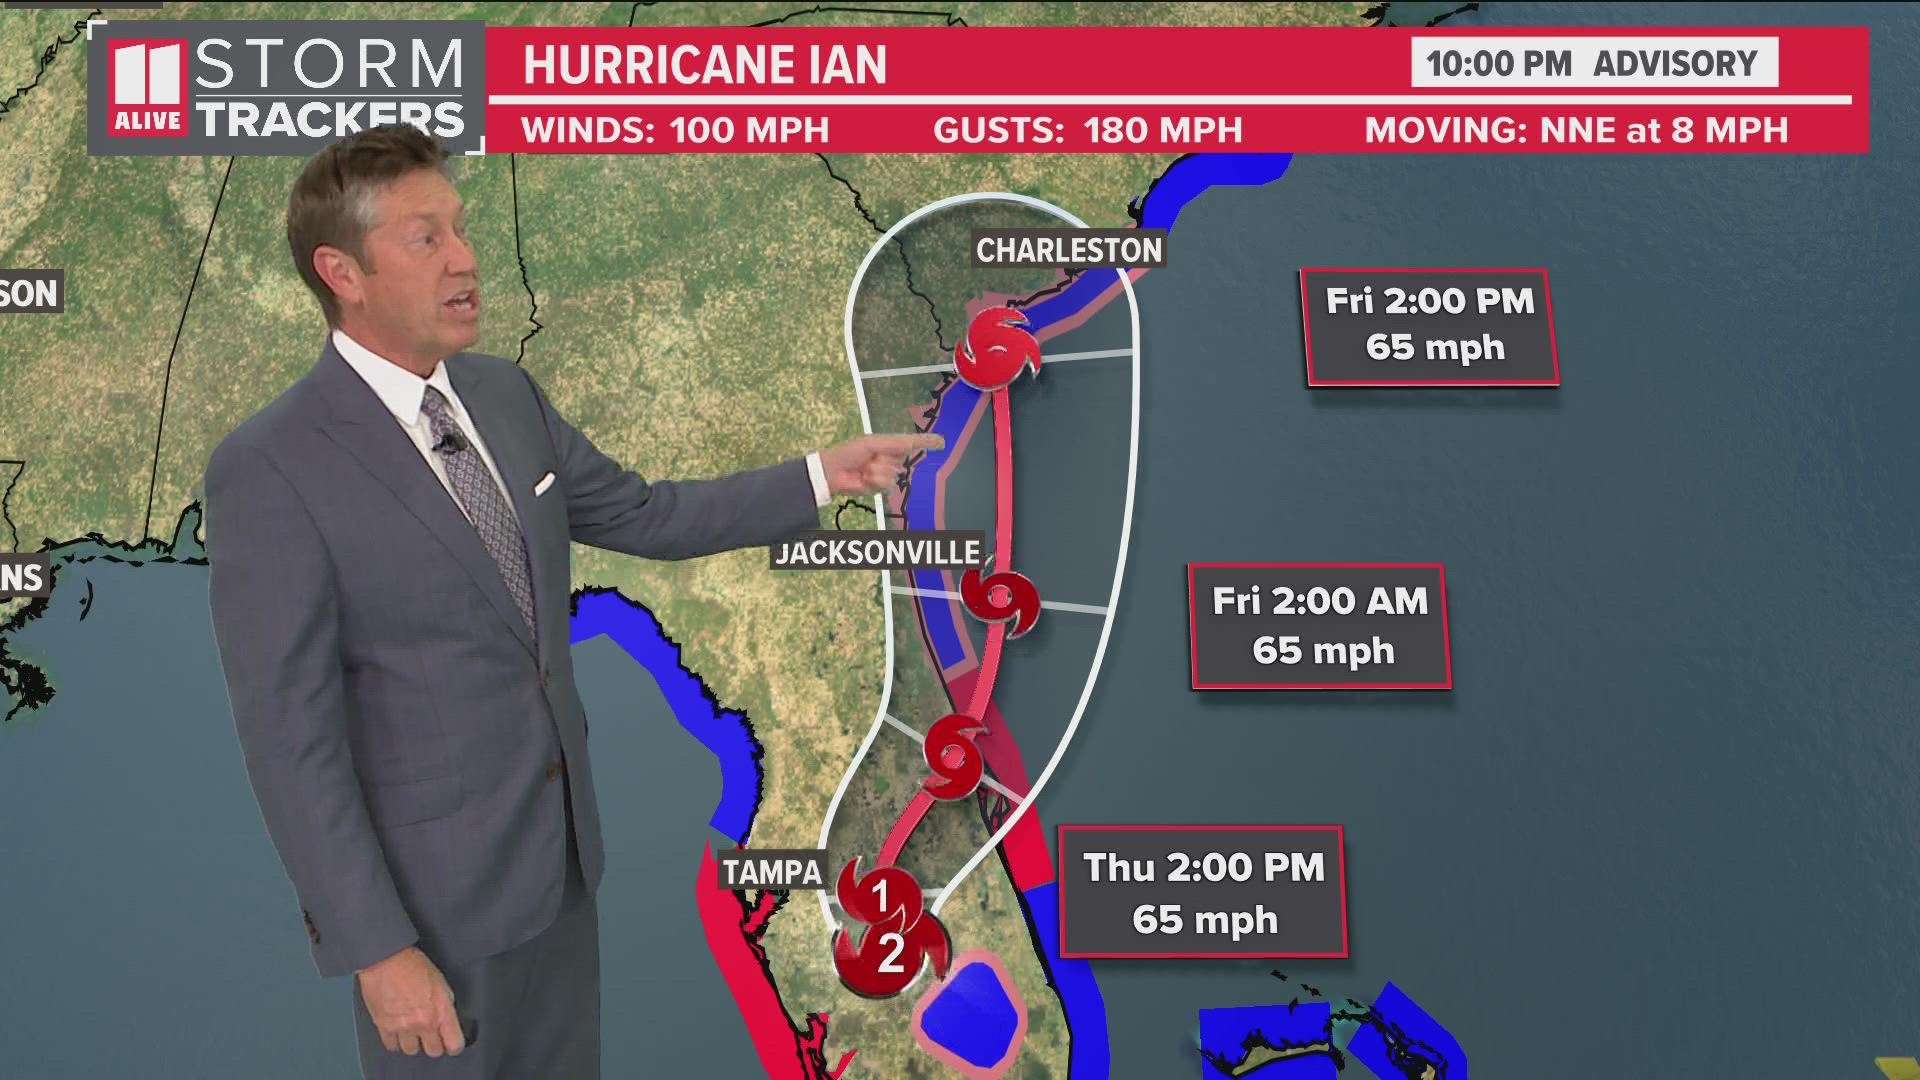 Hurricane Ian is bearing down on the coast of SW Florida. It made landfall Wednesday afternoon near Cayo Costa with maximum sustained winds of 150 mph.